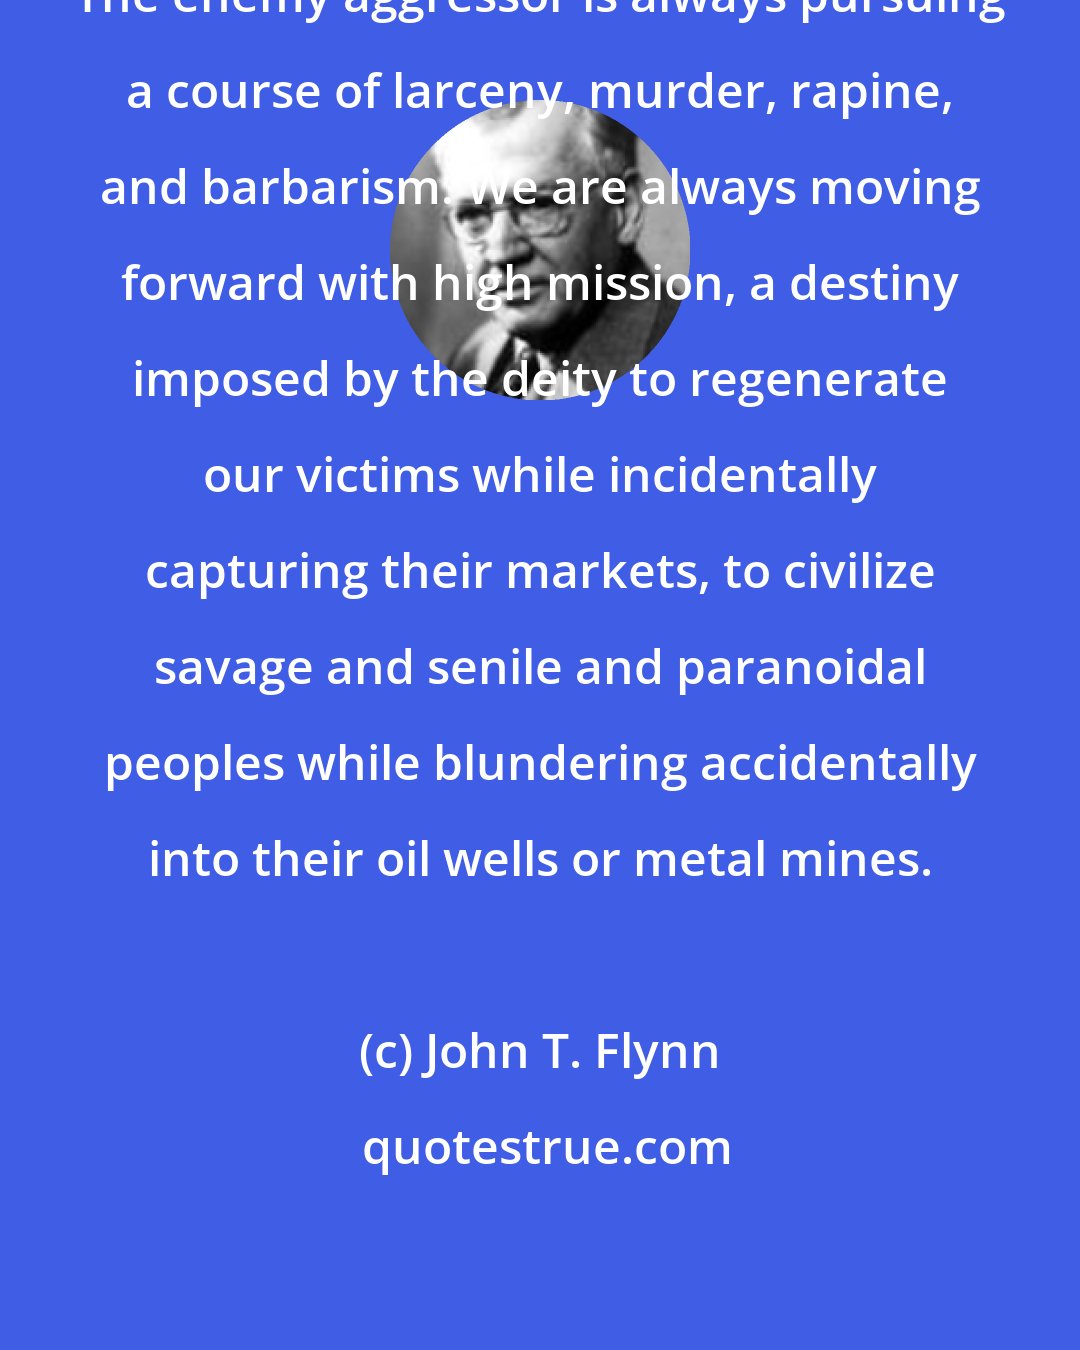 John T. Flynn: The enemy aggressor is always pursuing a course of larceny, murder, rapine, and barbarism. We are always moving forward with high mission, a destiny imposed by the deity to regenerate our victims while incidentally capturing their markets, to civilize savage and senile and paranoidal peoples while blundering accidentally into their oil wells or metal mines.